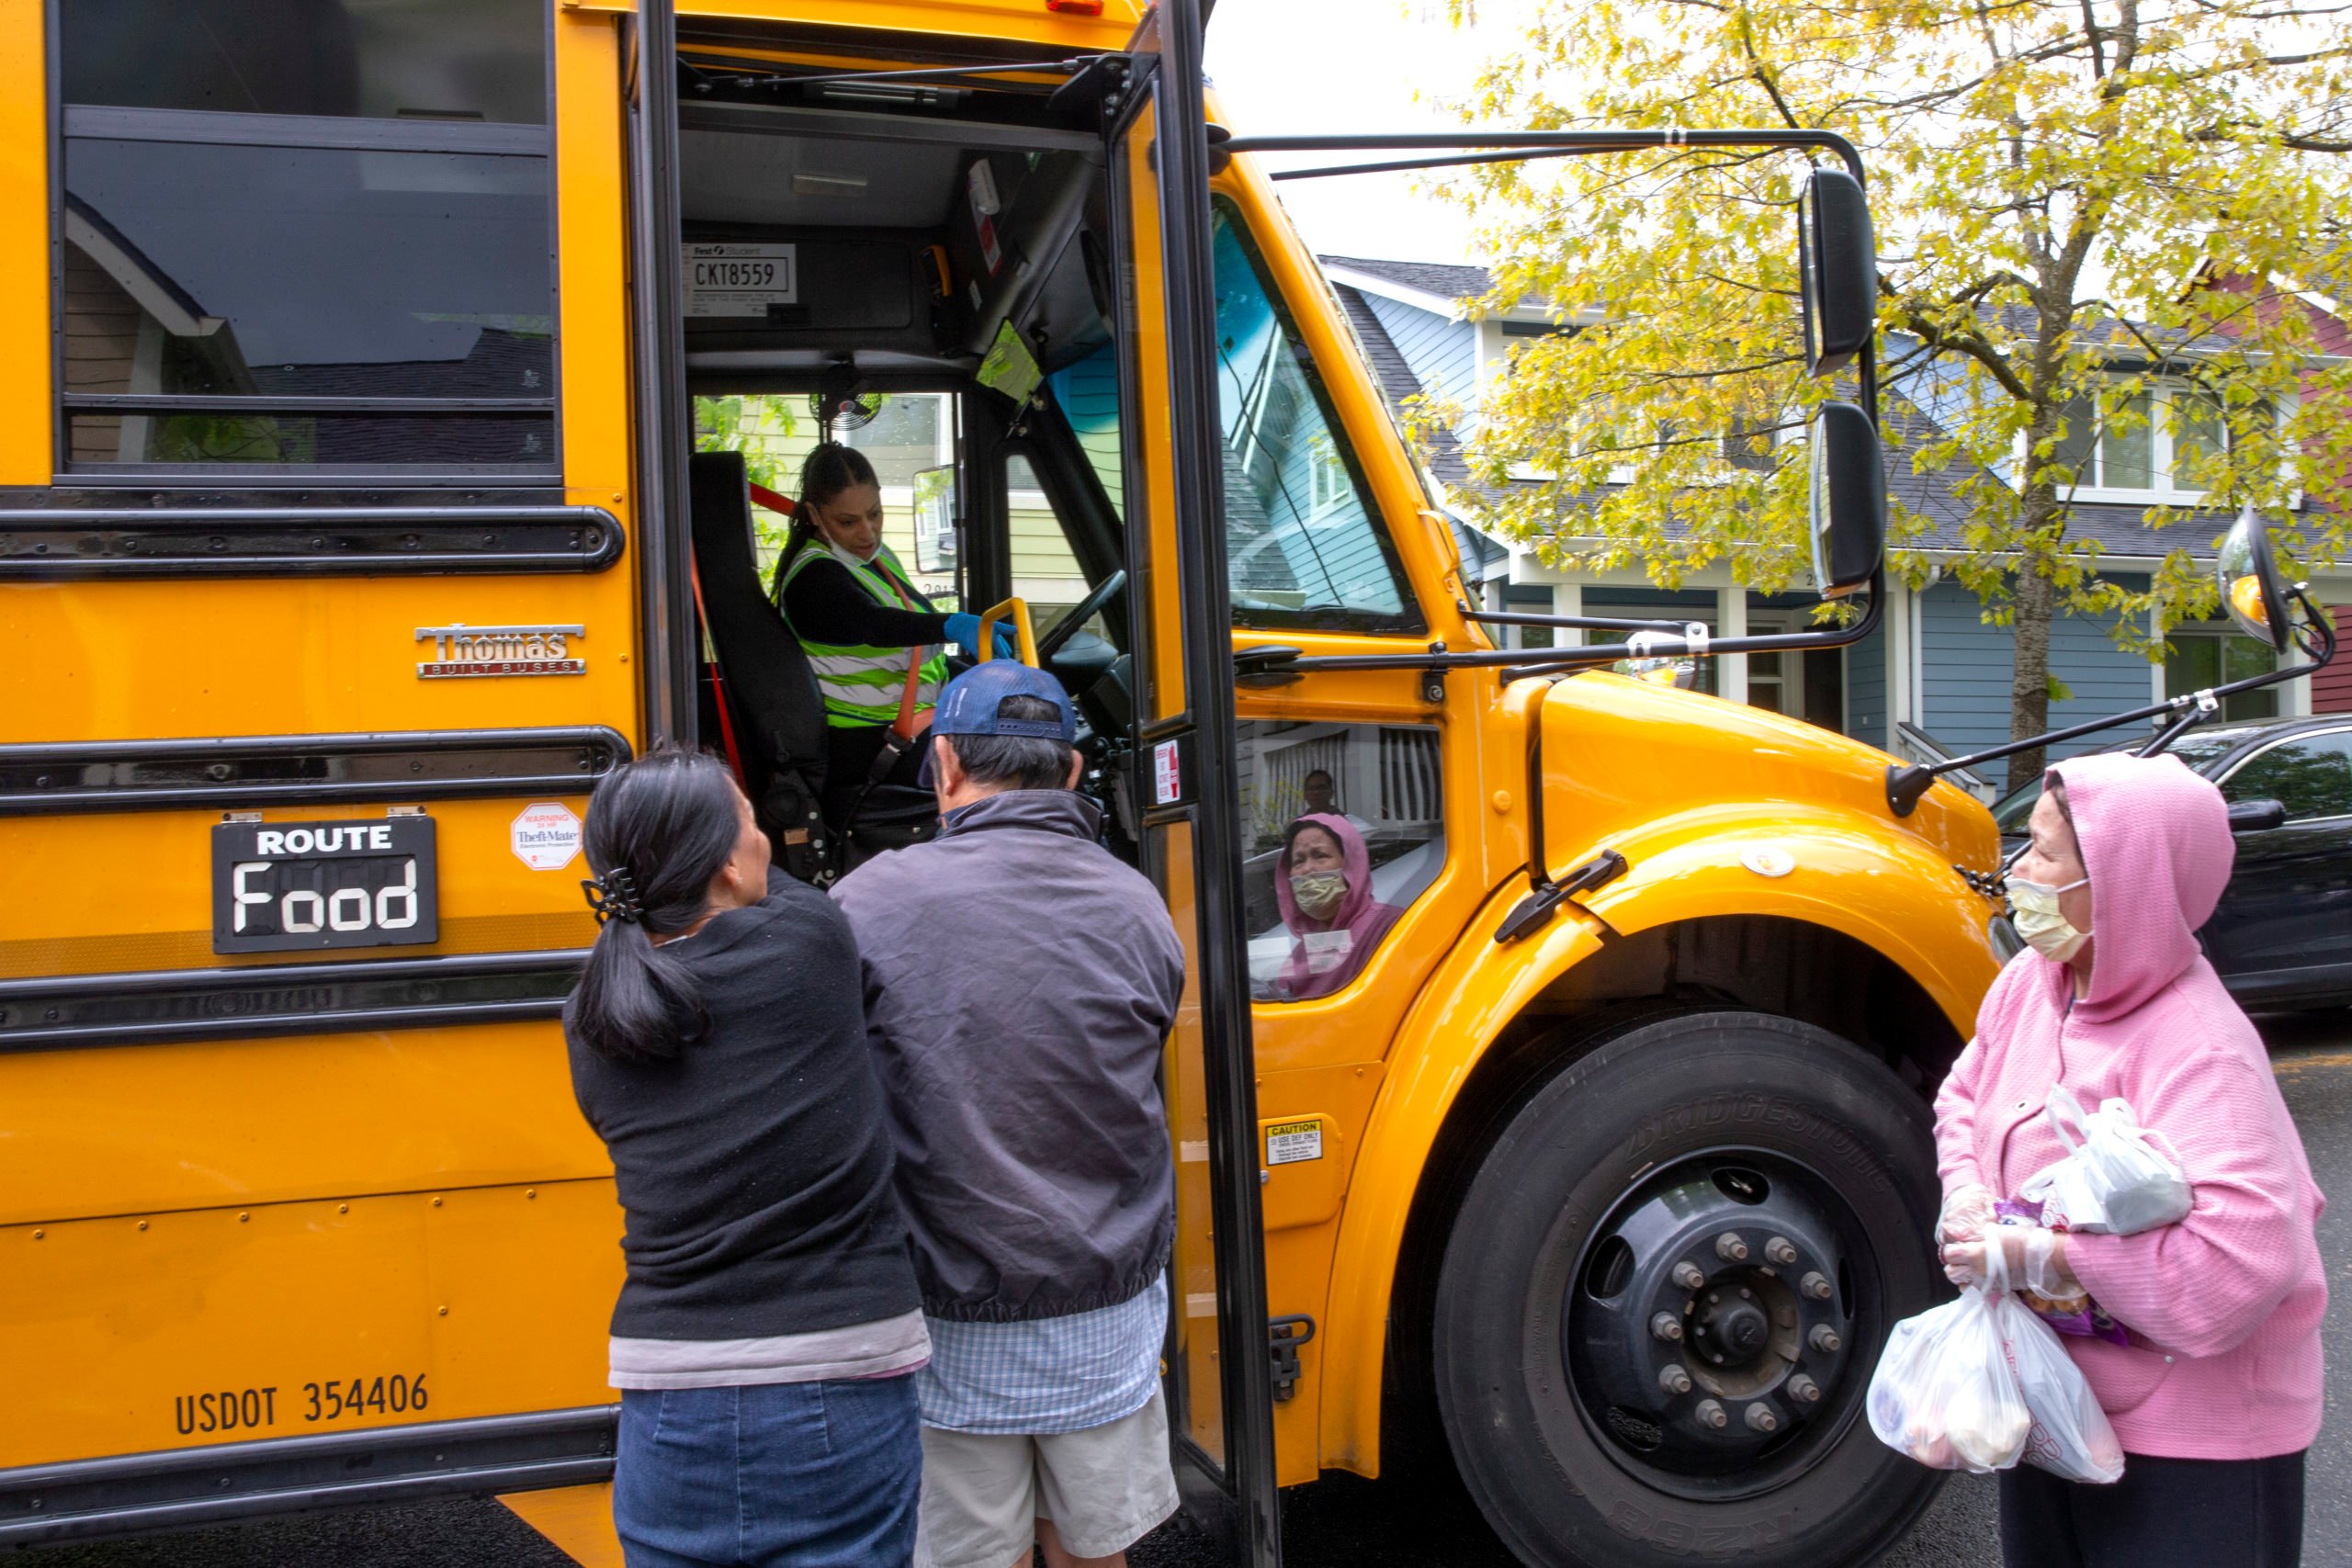 Bus driver Treva White delivers meals to children and their families on May 6, 2020 in Seattle, Washington. Since the outbreak of COVID-19 and the closure of all school buildings, the Seattle Public Schools Nutrition Services Department has been distributing breakfast and lunch to students through a network of 26 school sites and 43 bus routes five days a week. The meal distribution also includes additional food for weekends. Approximately 6,500 people are served per day through the program. (Photo by Karen Ducey/Getty Images)